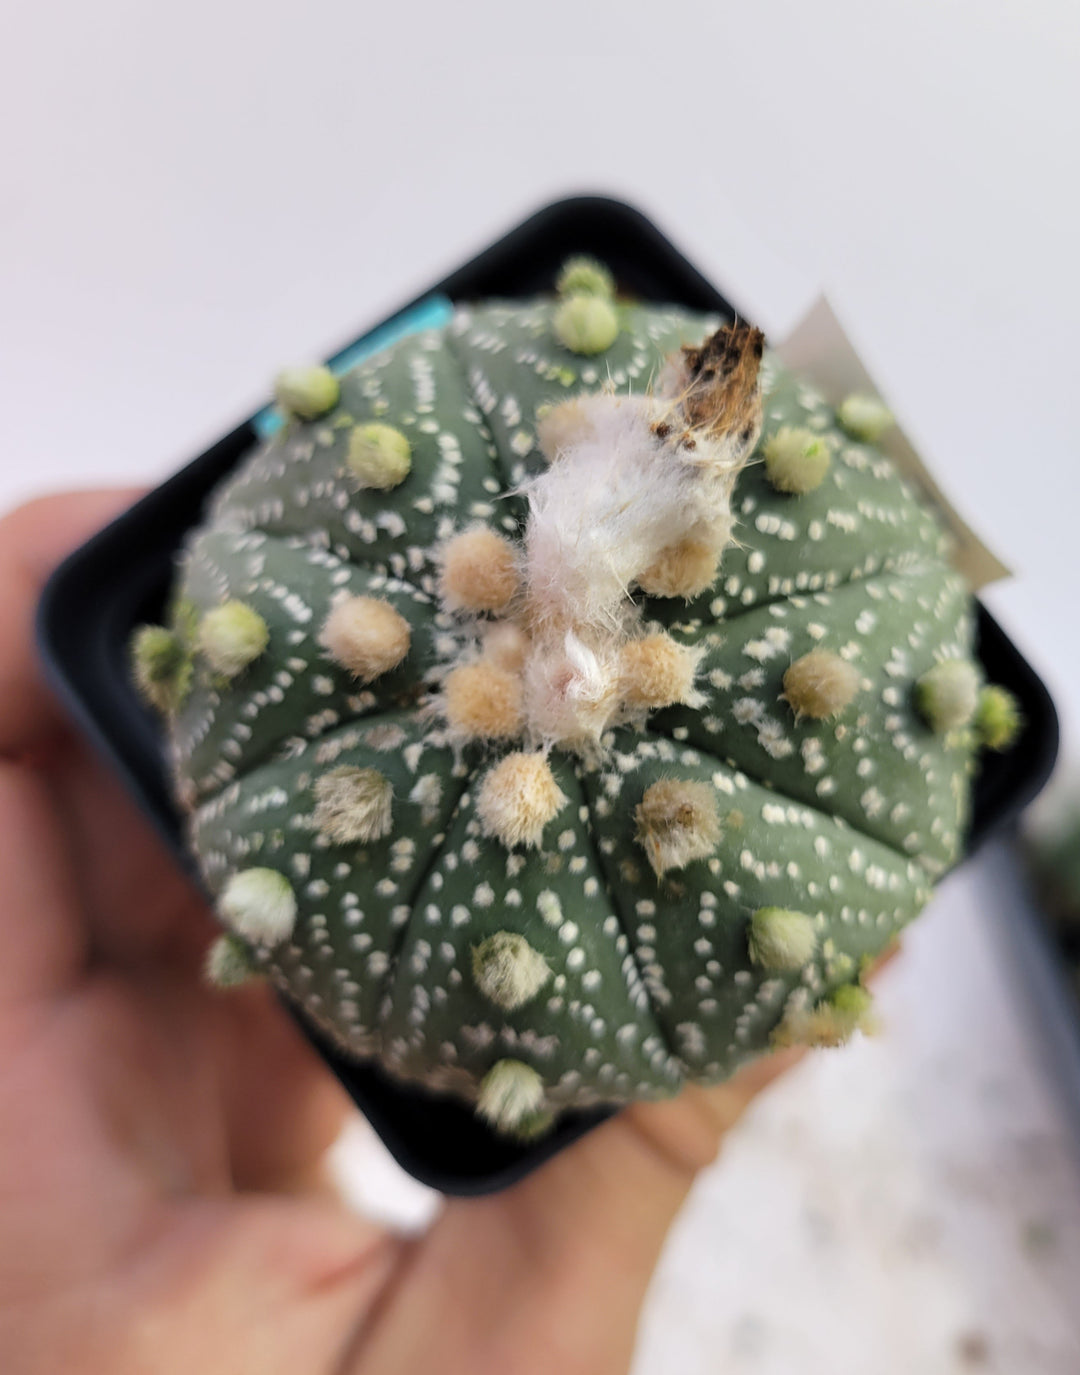 Astrophytum asterias cv. Superkabuto, rooted and established Deaw Cactus- Flowering Seed Grown#T28 - Nice Plants Good Pots